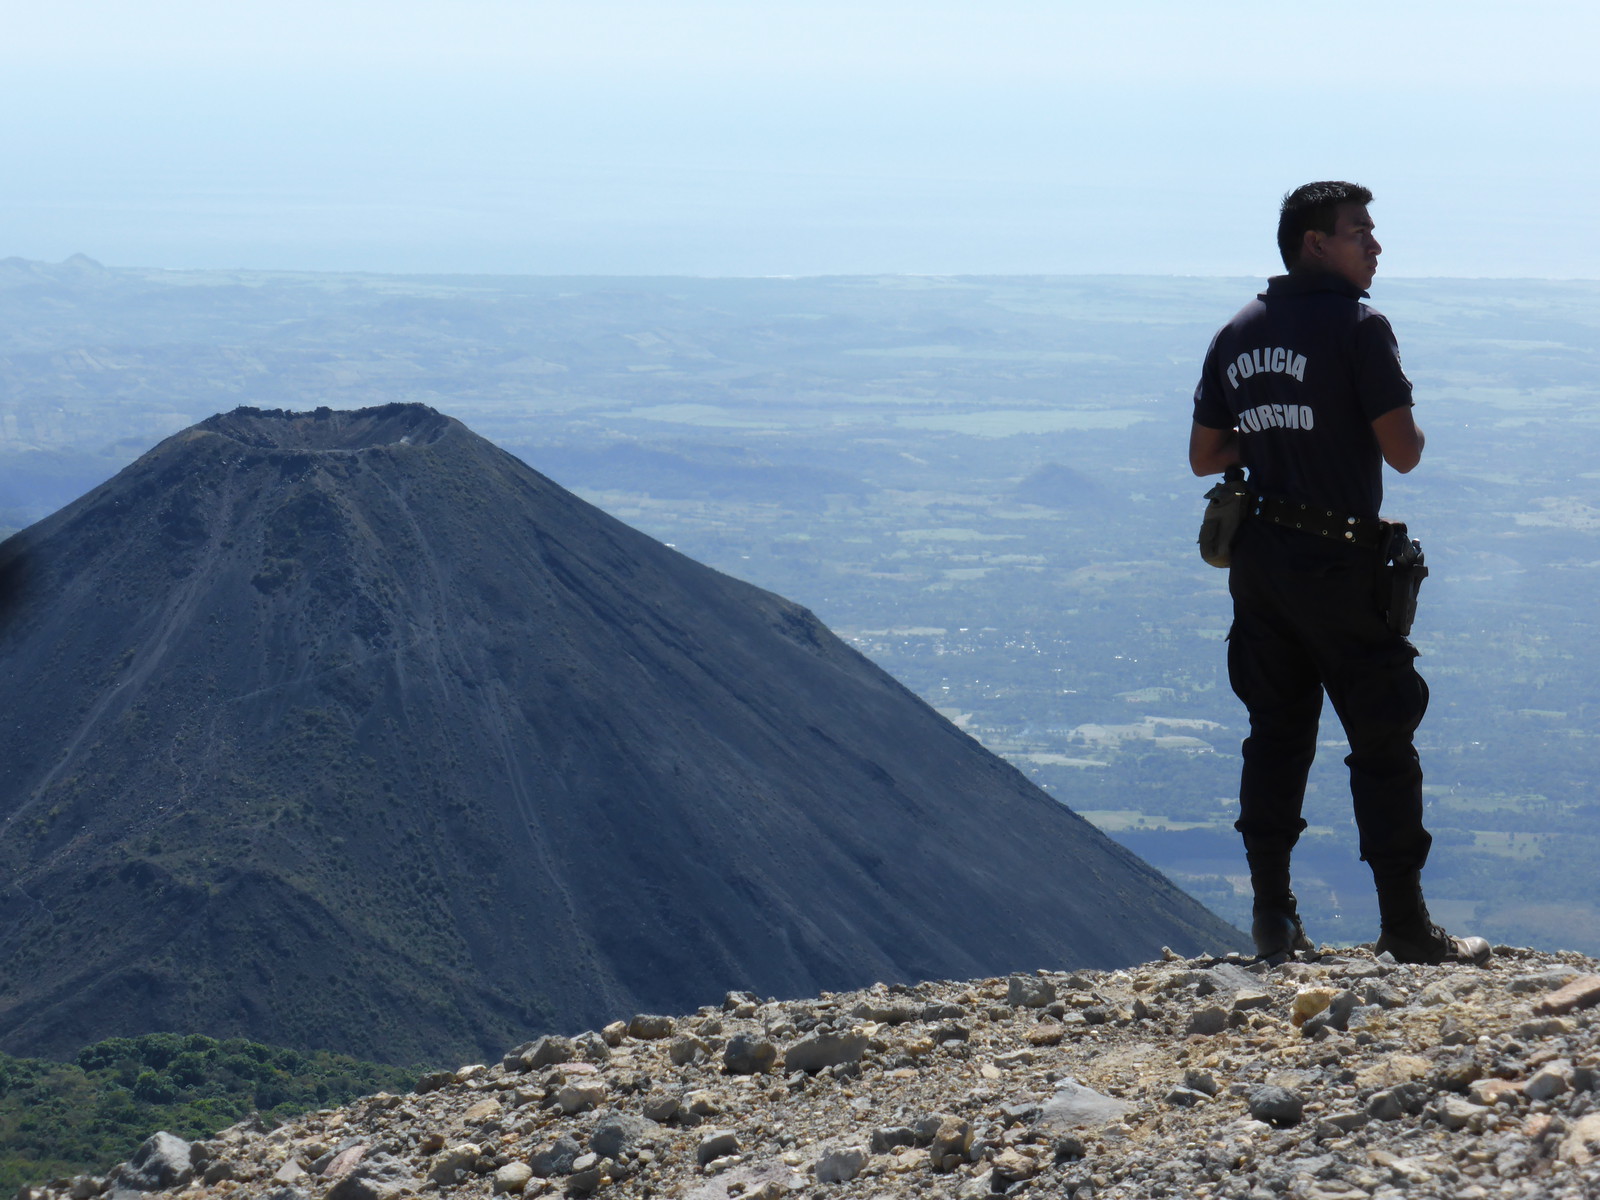 Our police guide on top of Santa Ana, with Izalco in the background